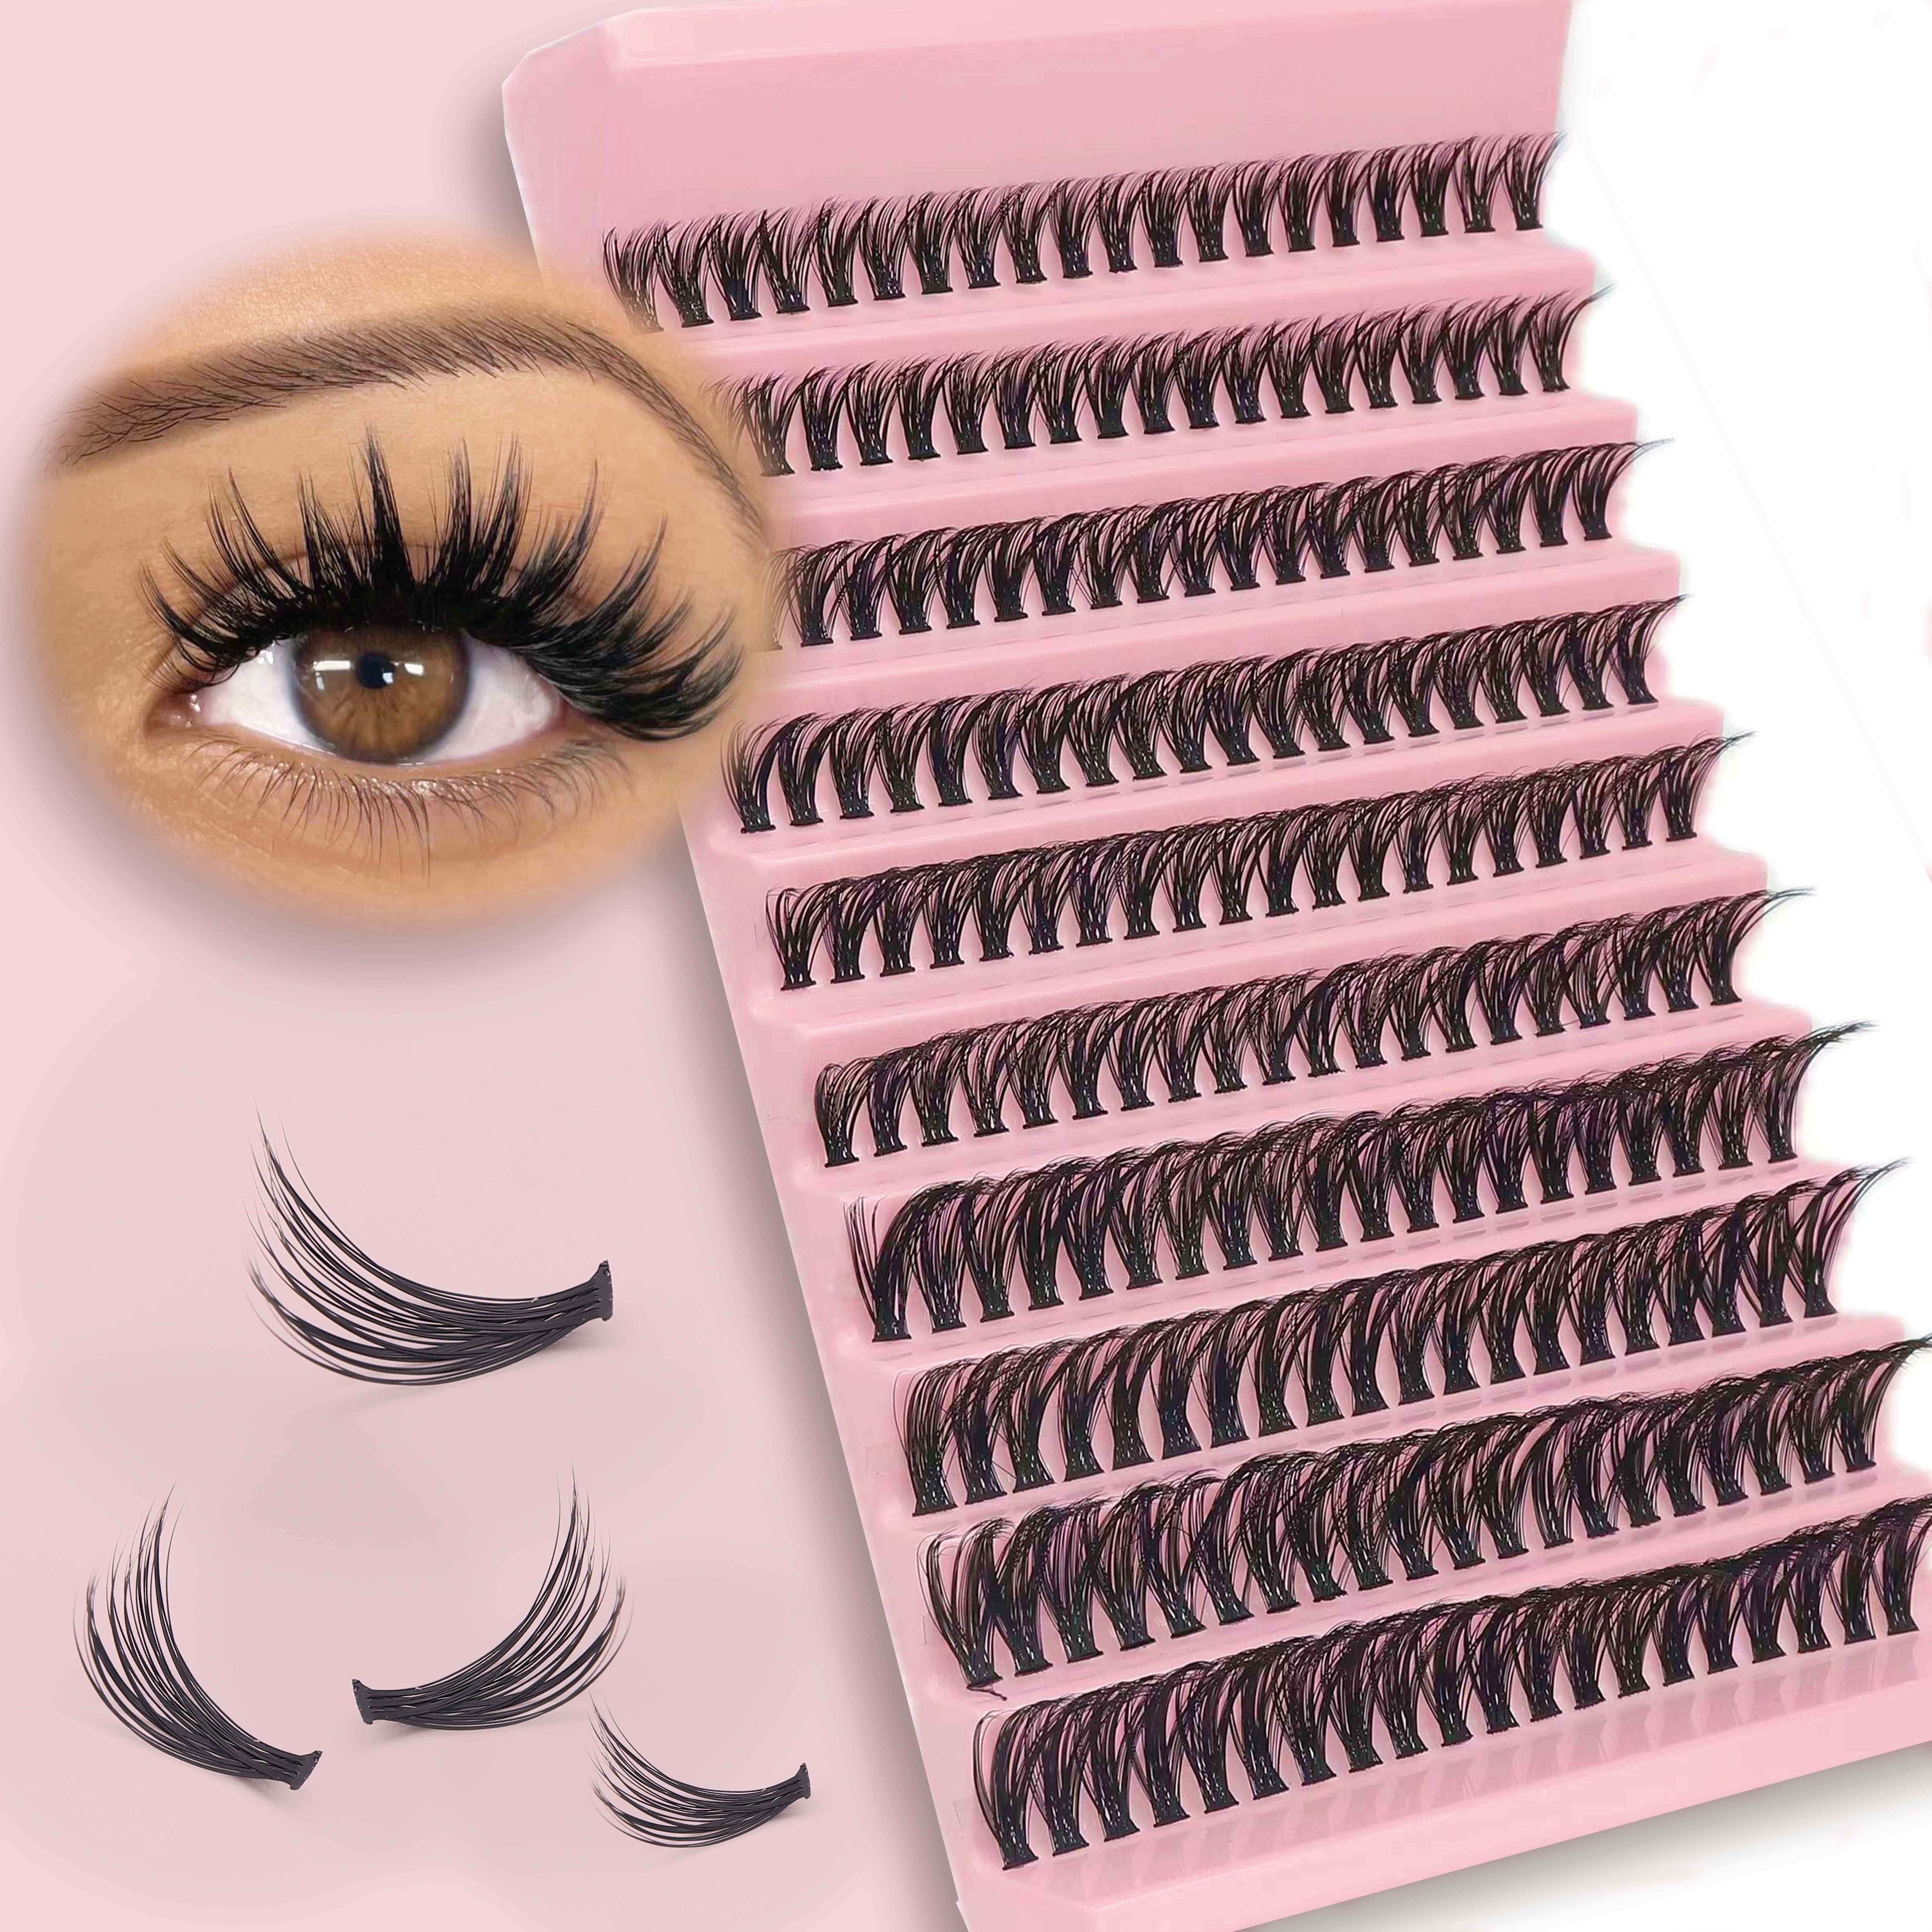 

200-piece Demon King Diy False Eyelashes Kit - Ultra Fine & Thick, Dense Cat Eye Style, Beginner-friendly, Reusable With Natural Look, Self-adhesive, 10mm-15mm Lengths